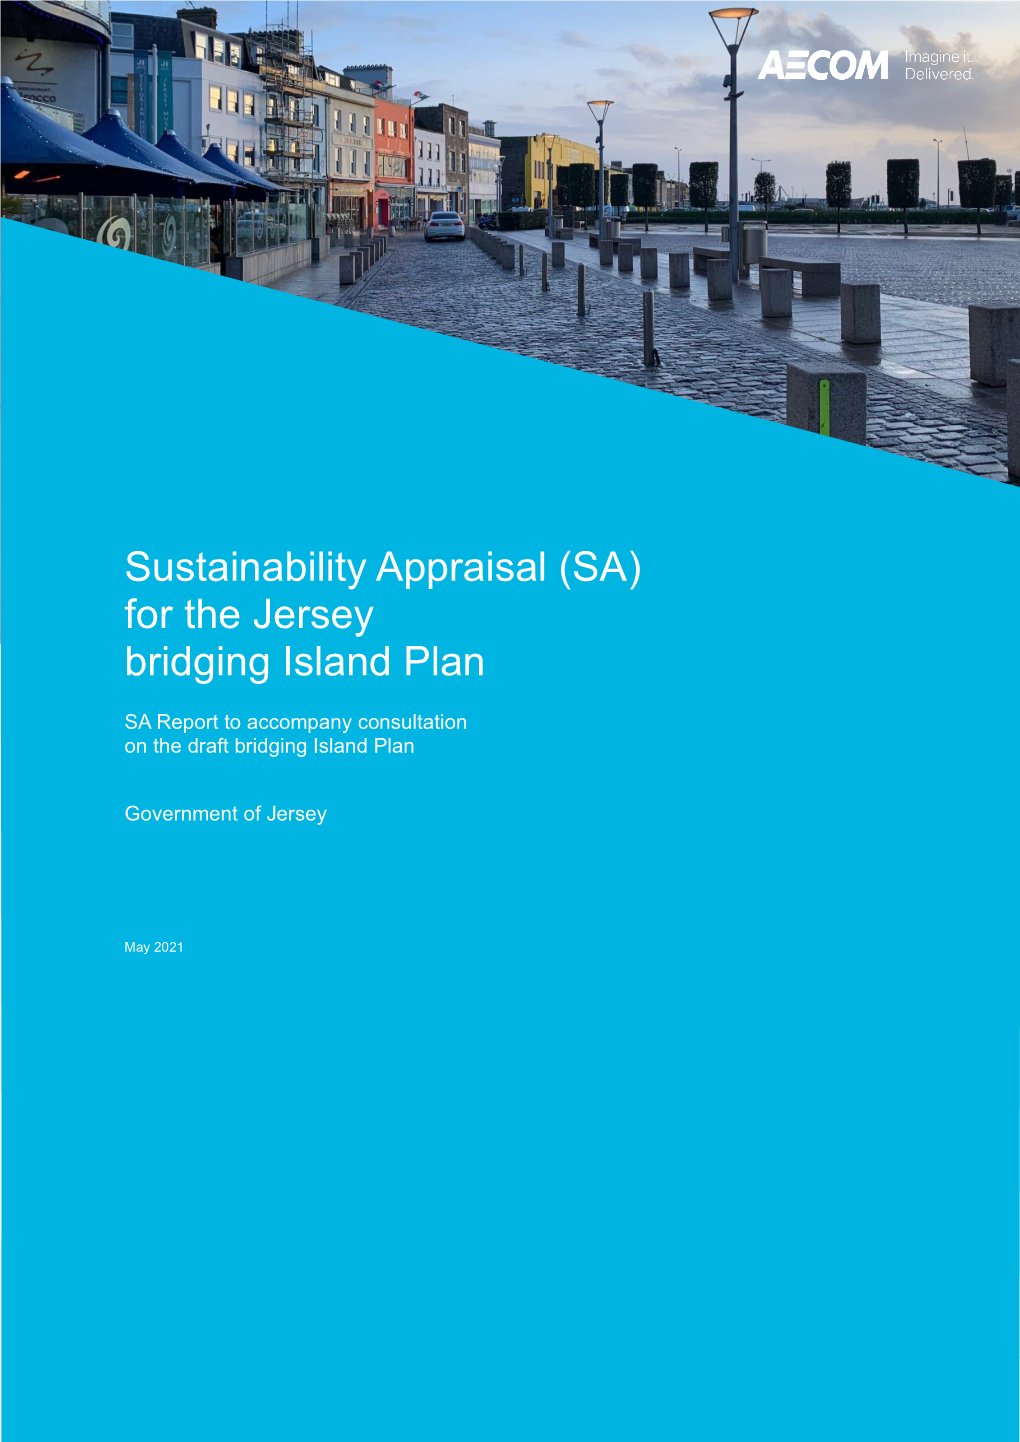 Sustainability Appraisal (SA) for the Jersey Bridging Island Plan